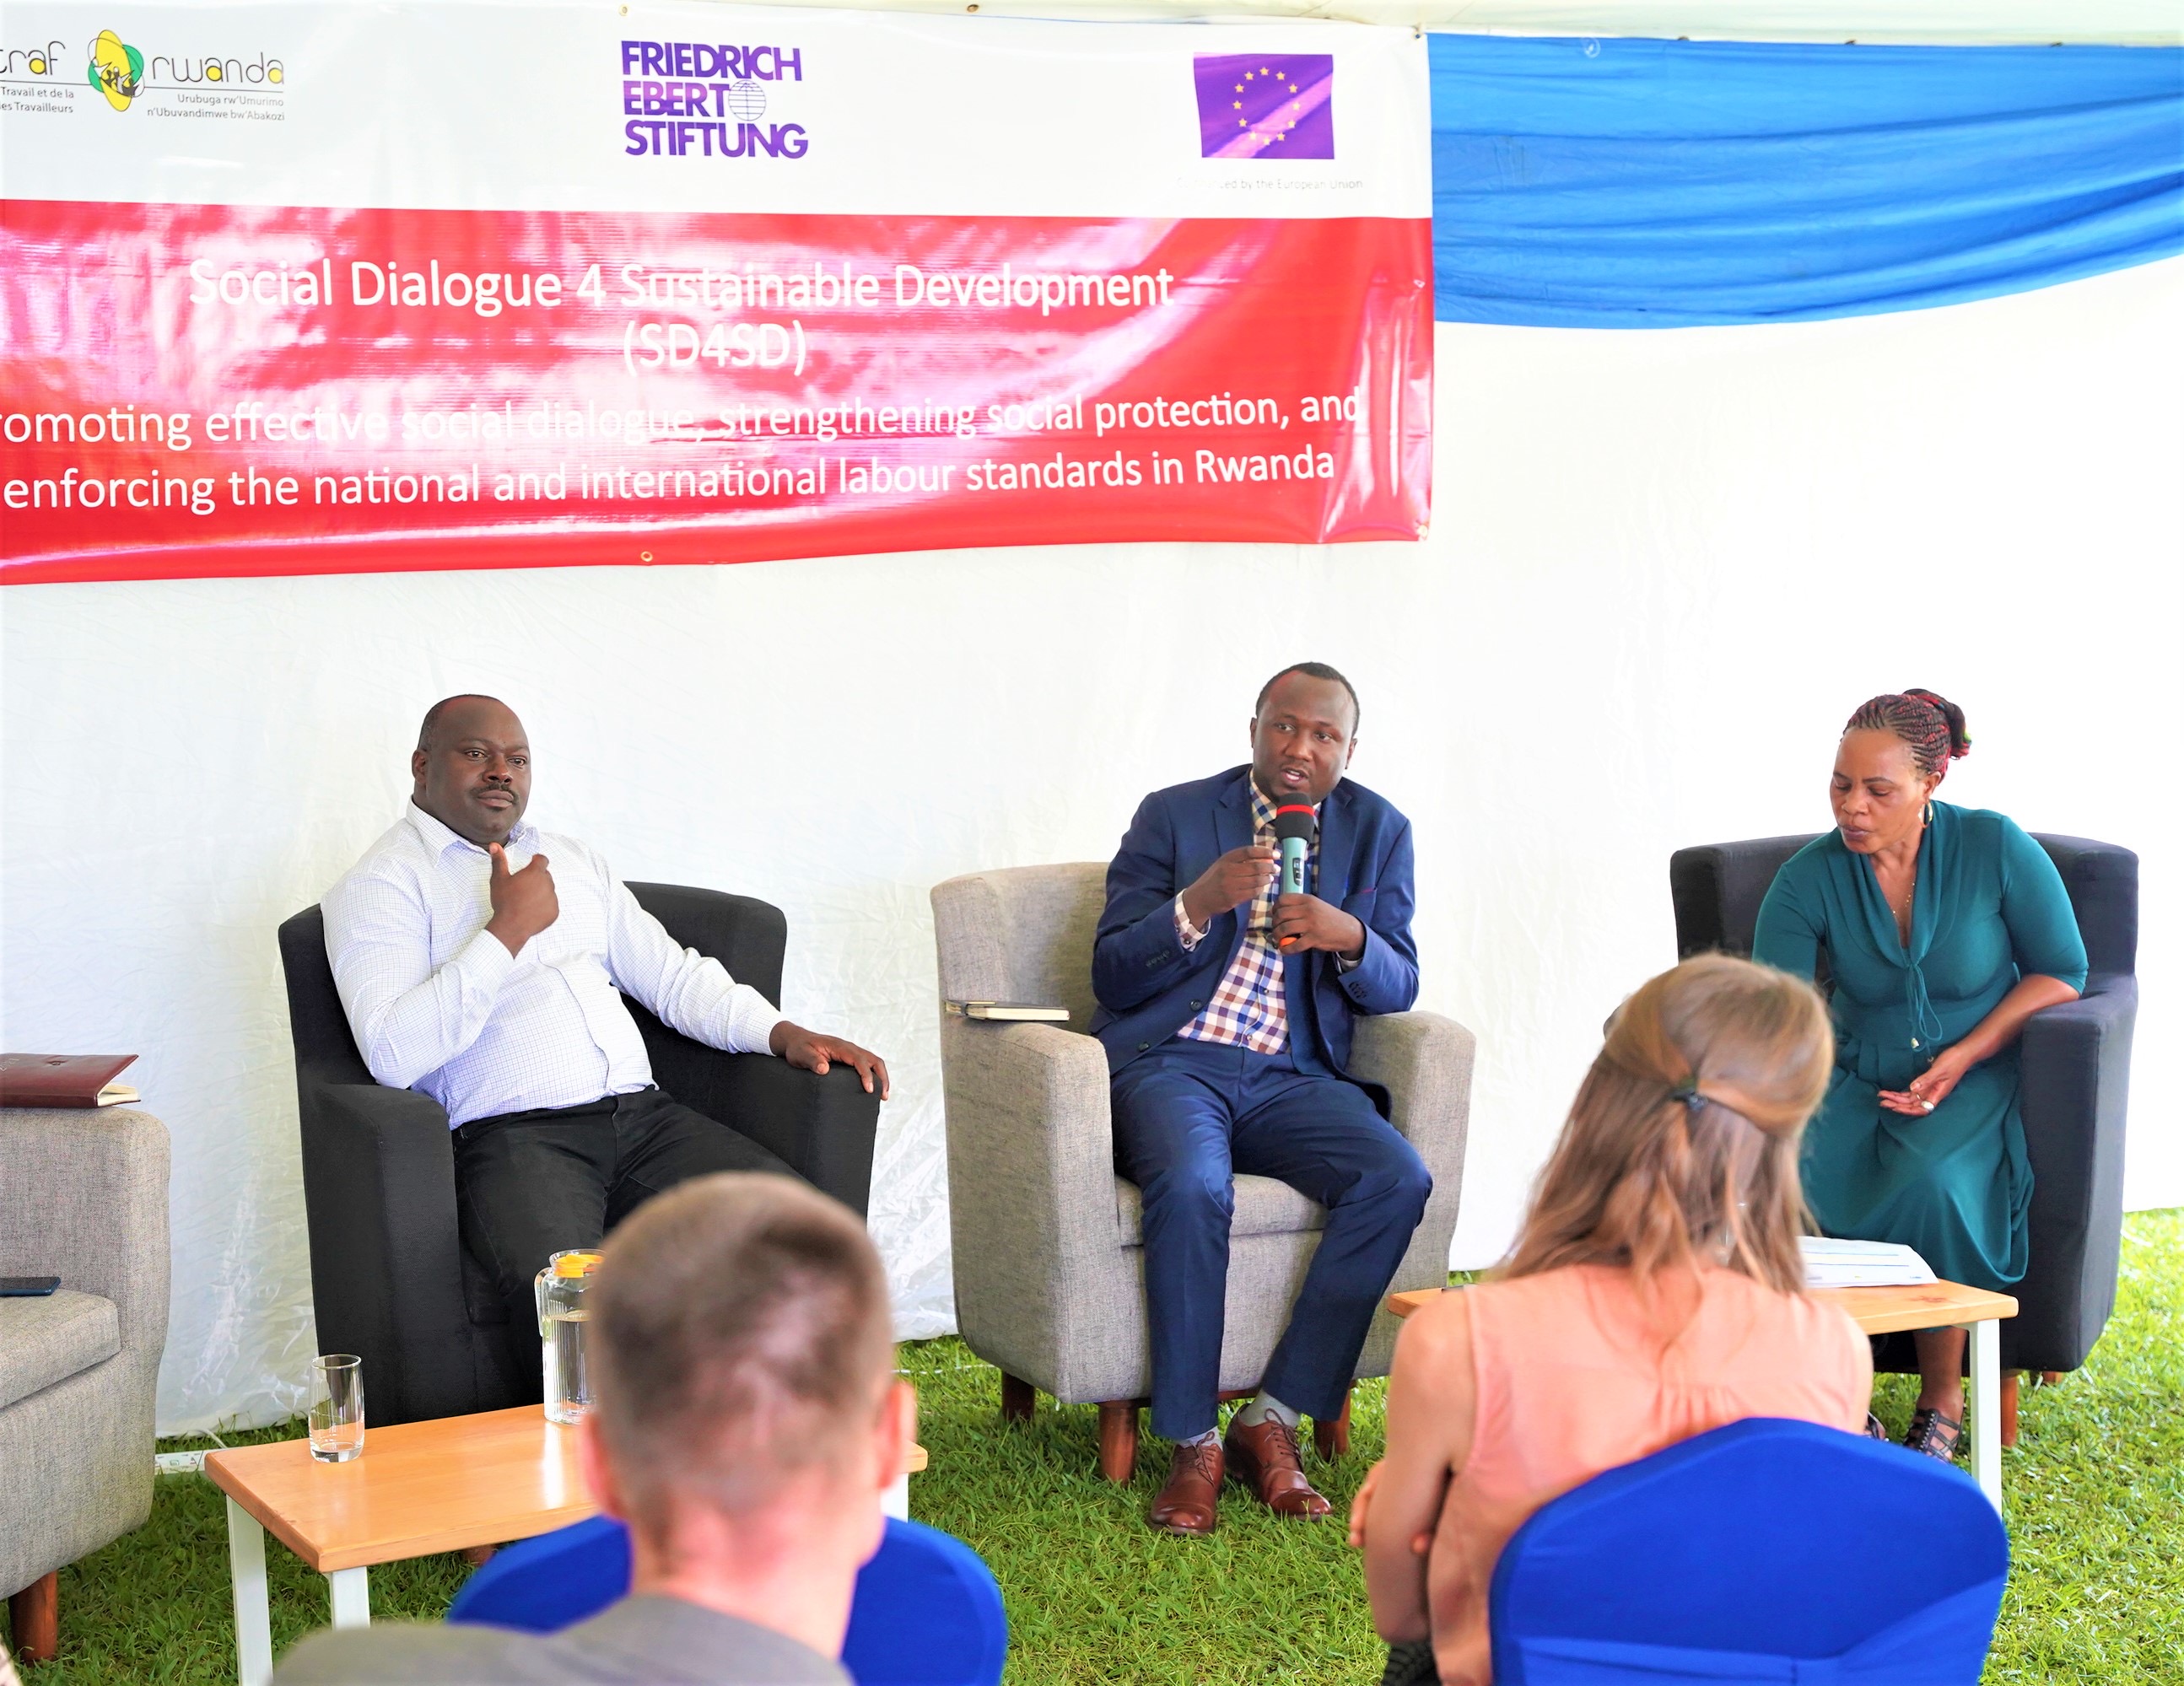 Representative of COTRAF Eric Nzabandora and the DG in MIFOTRA, Faustin Mwabali during a panel discussion in the event. All photos by Craish Bahizi